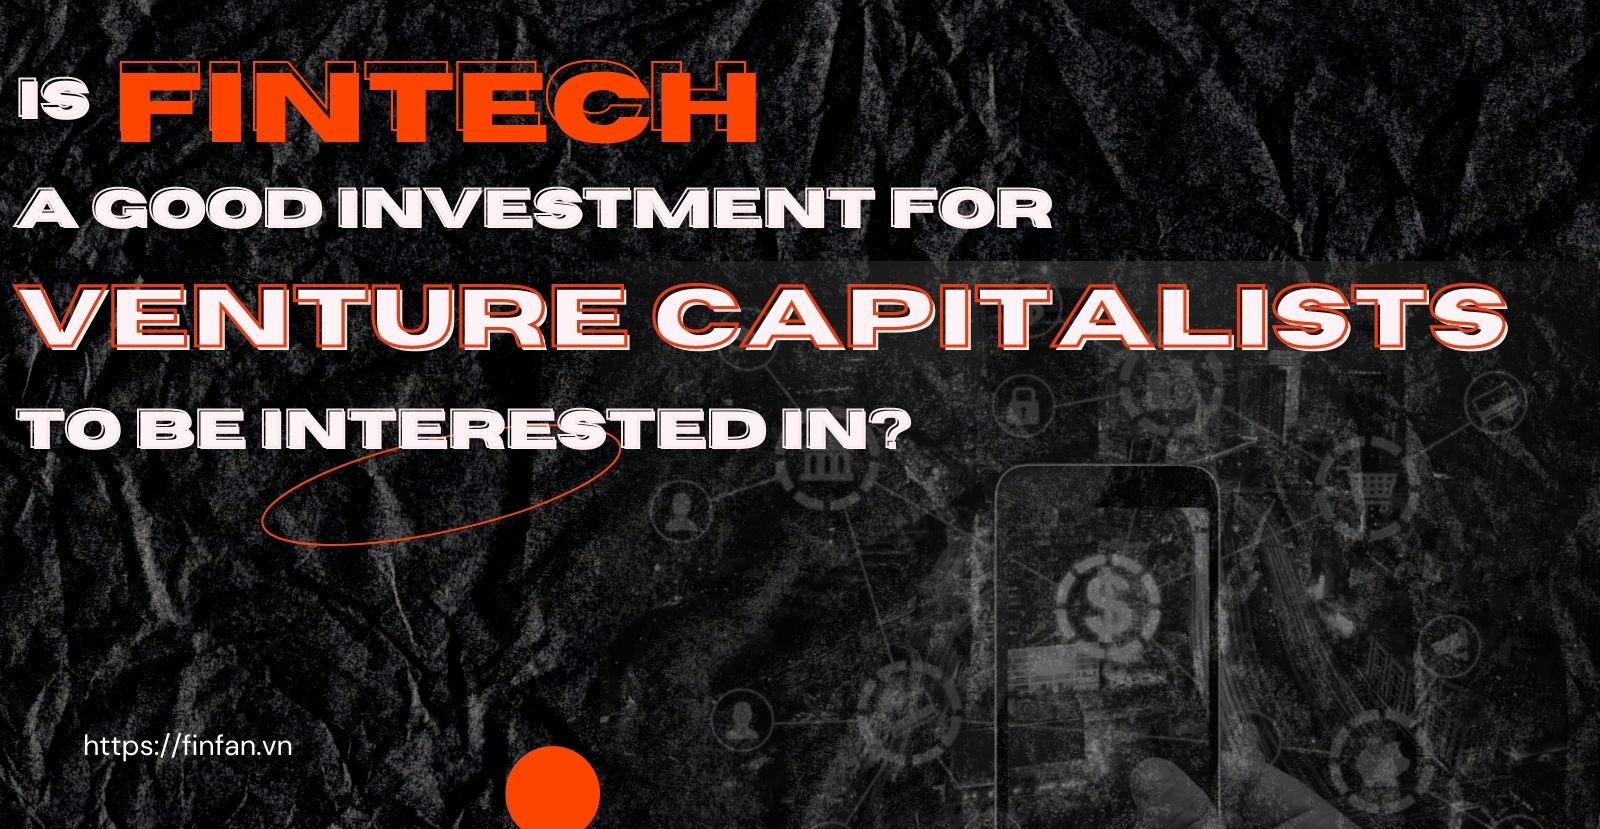 Is fintech a good investment for venture capitalists to be interested in?